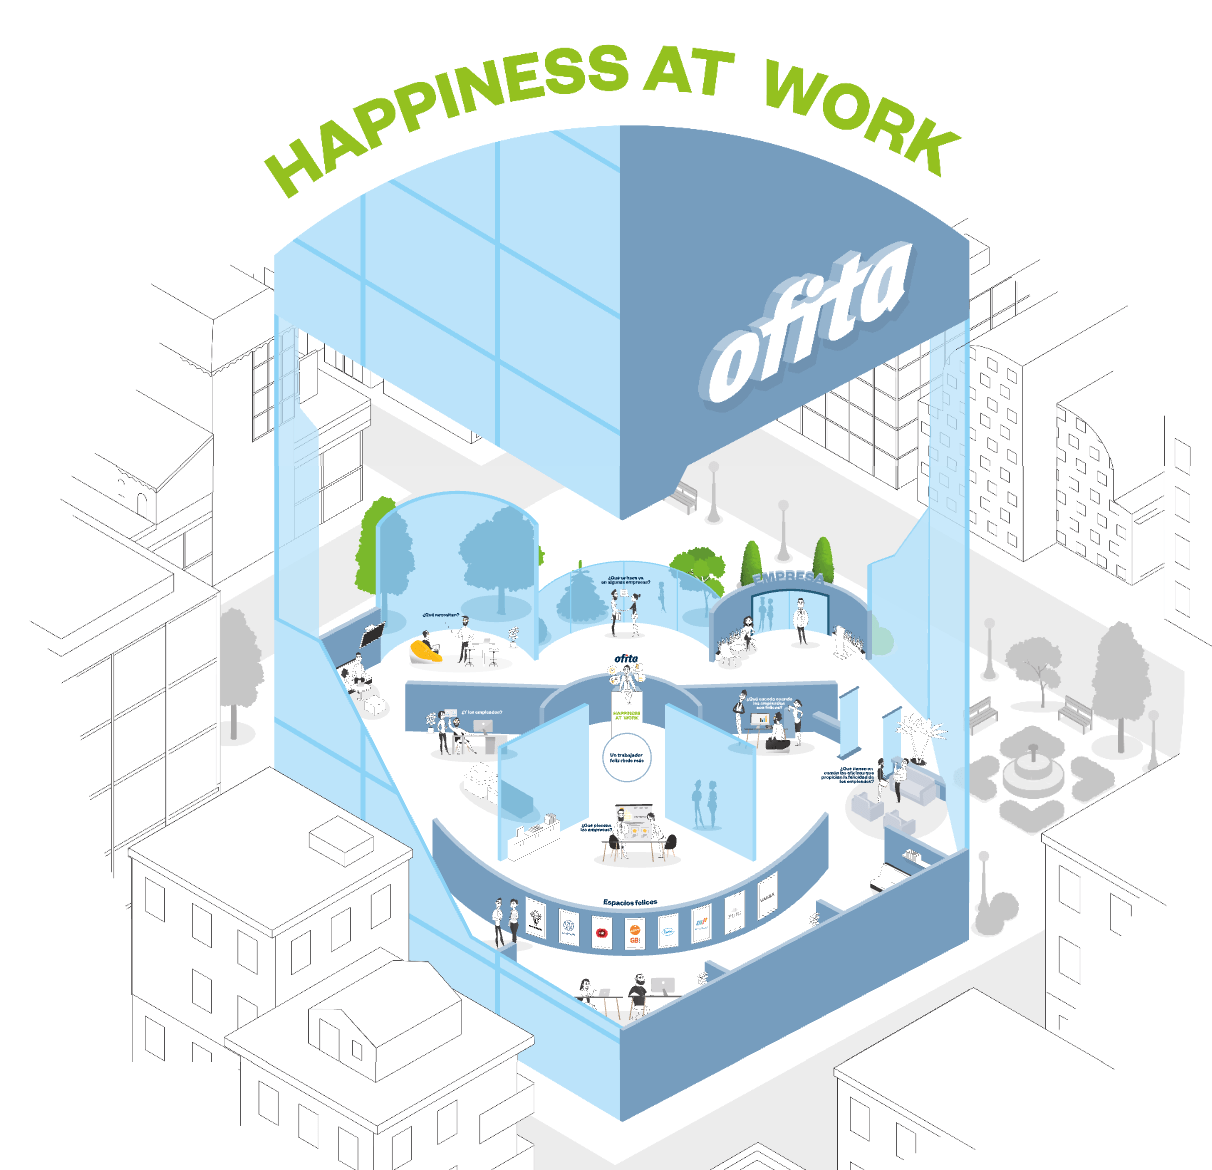 happiness at work